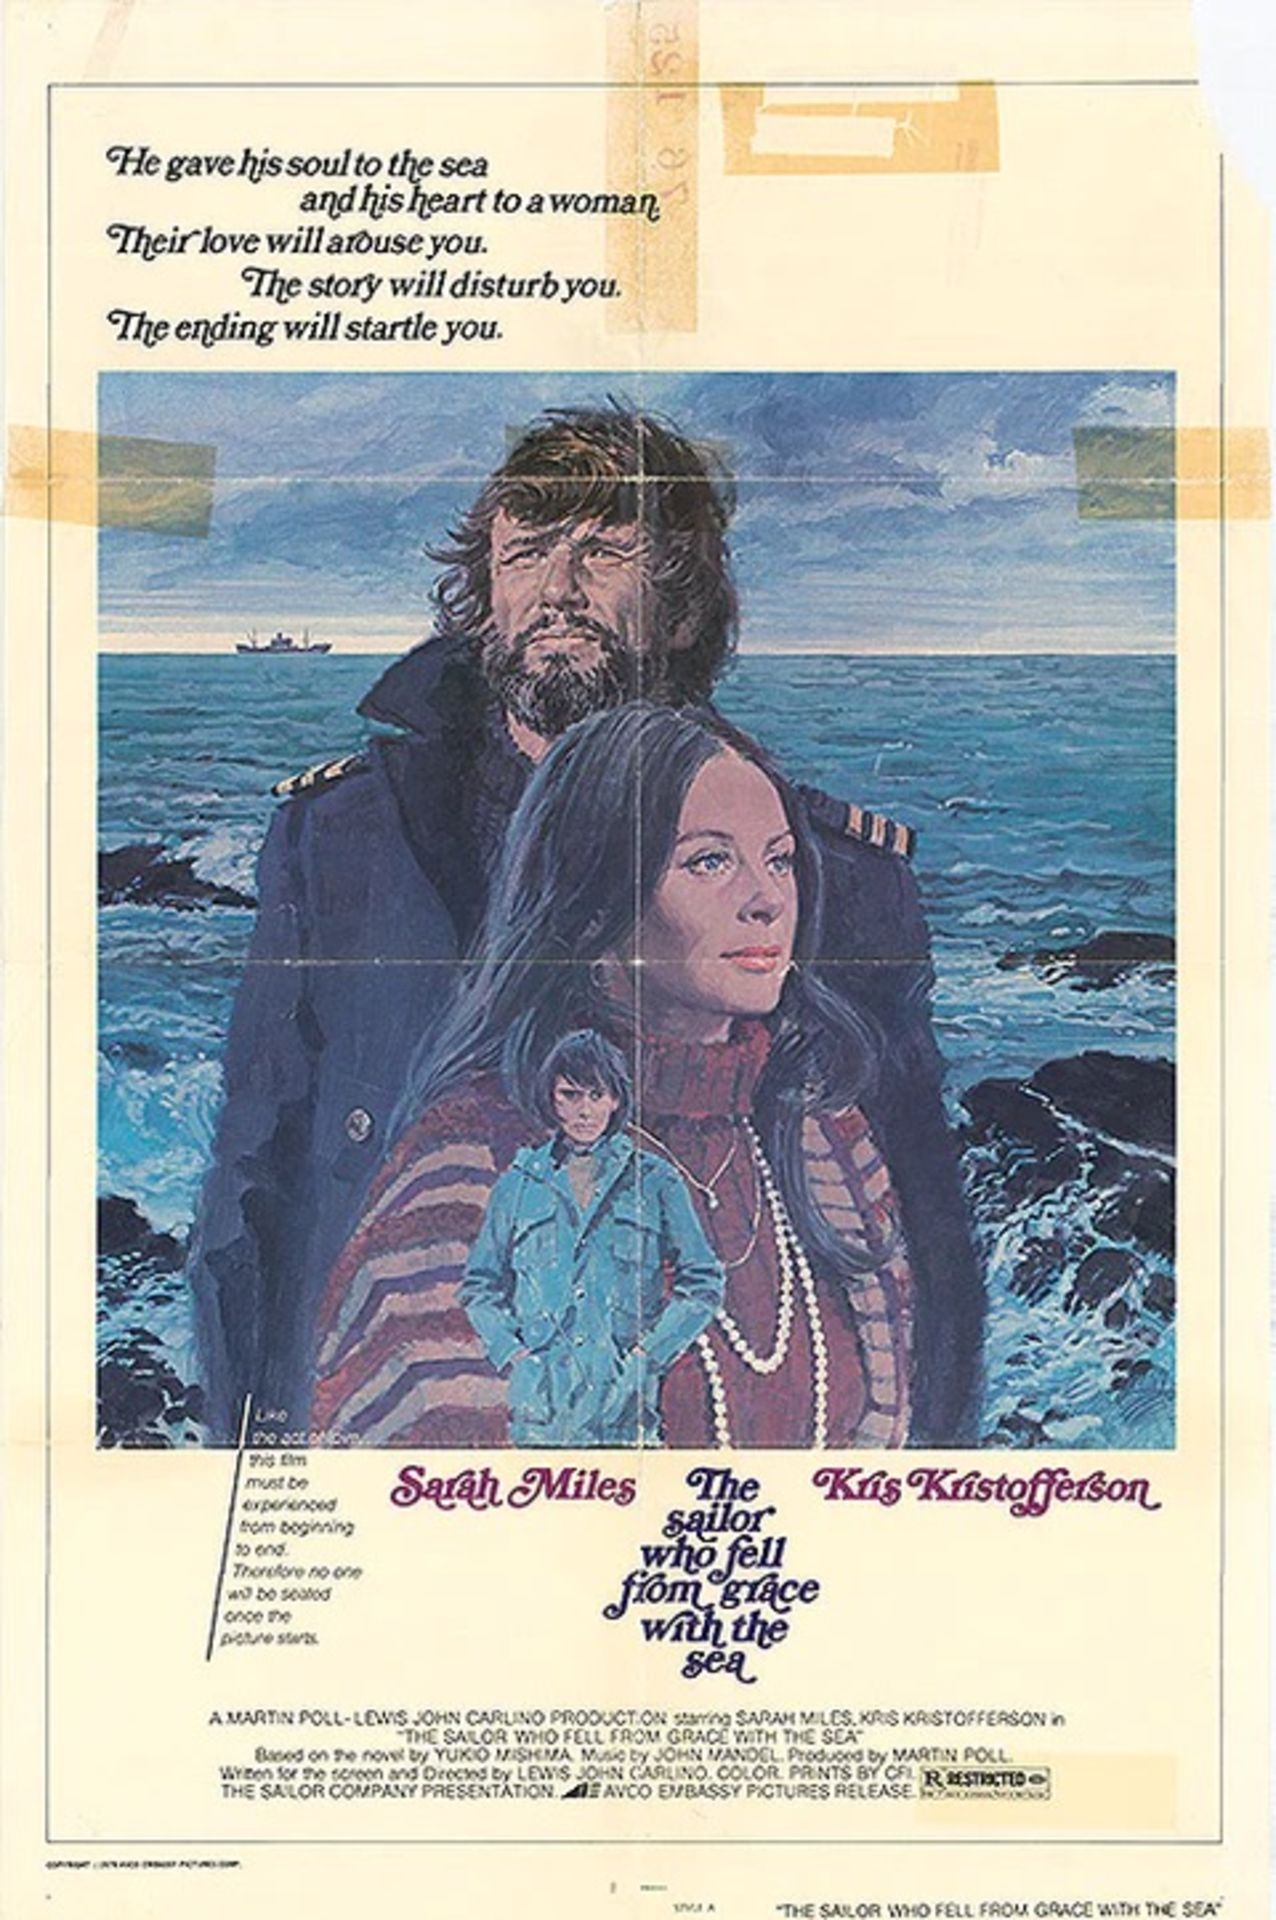 Sailor Who Fell from Grace with the Sea, 1976 Movie Poster